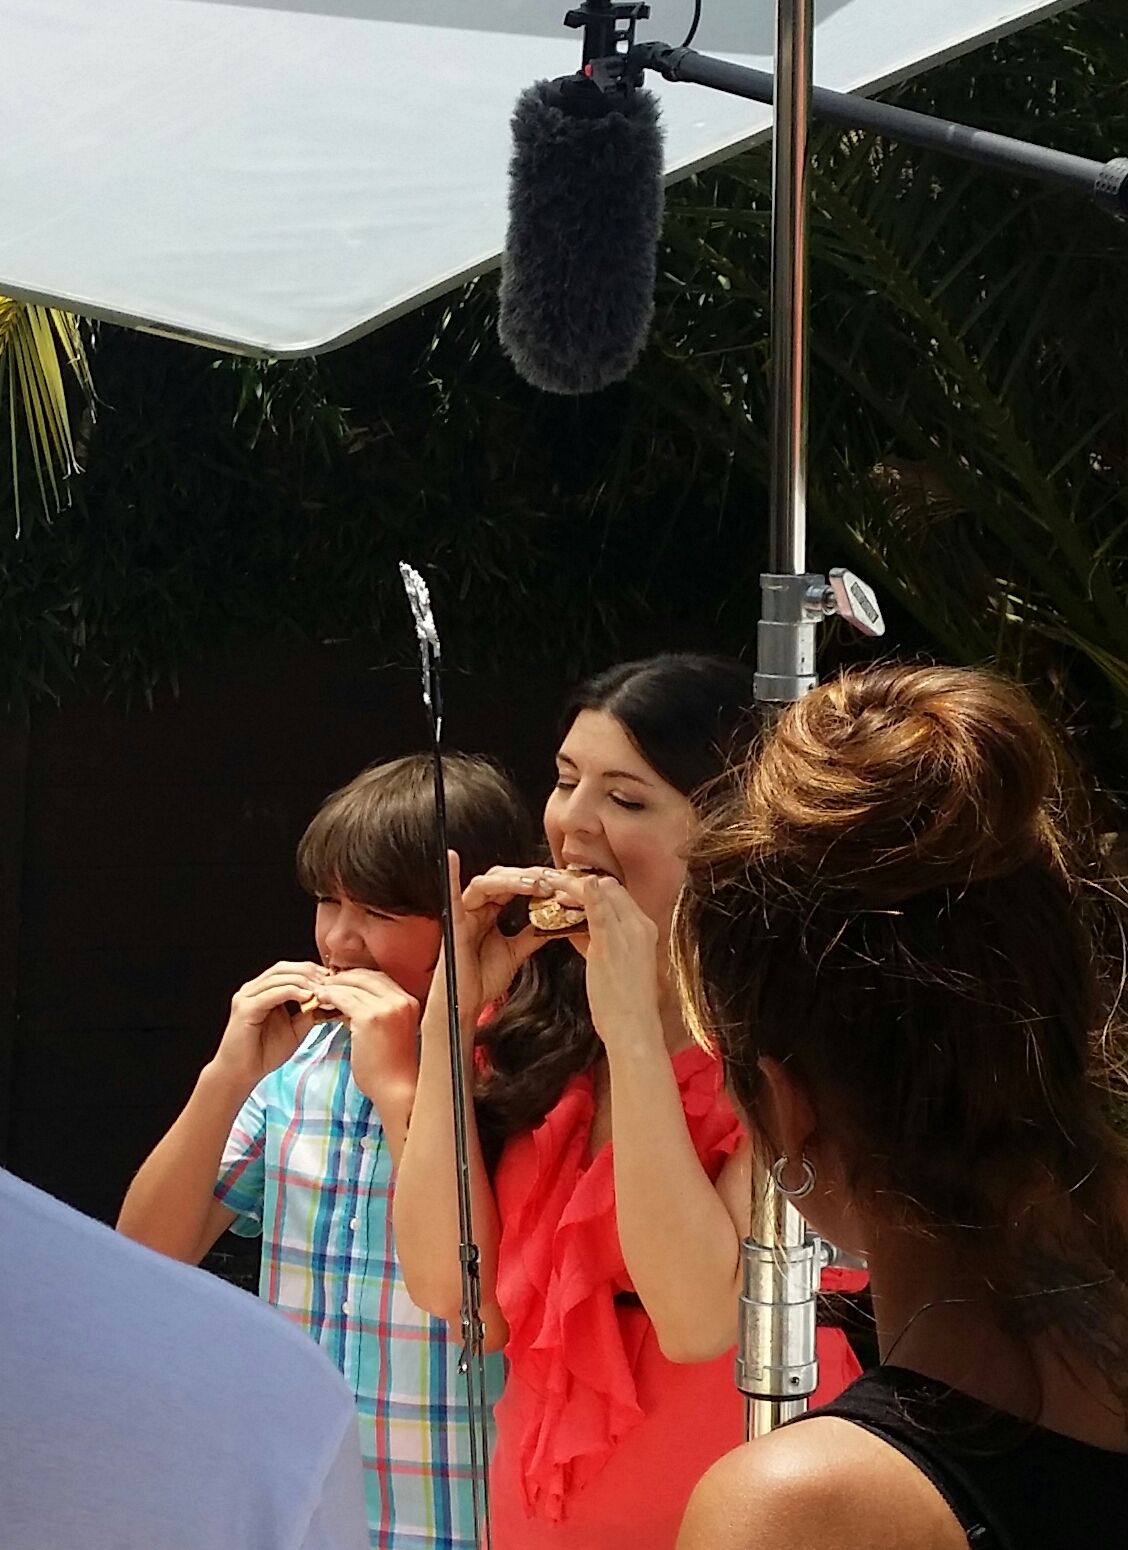 Shooting a Hershey's Commercial.